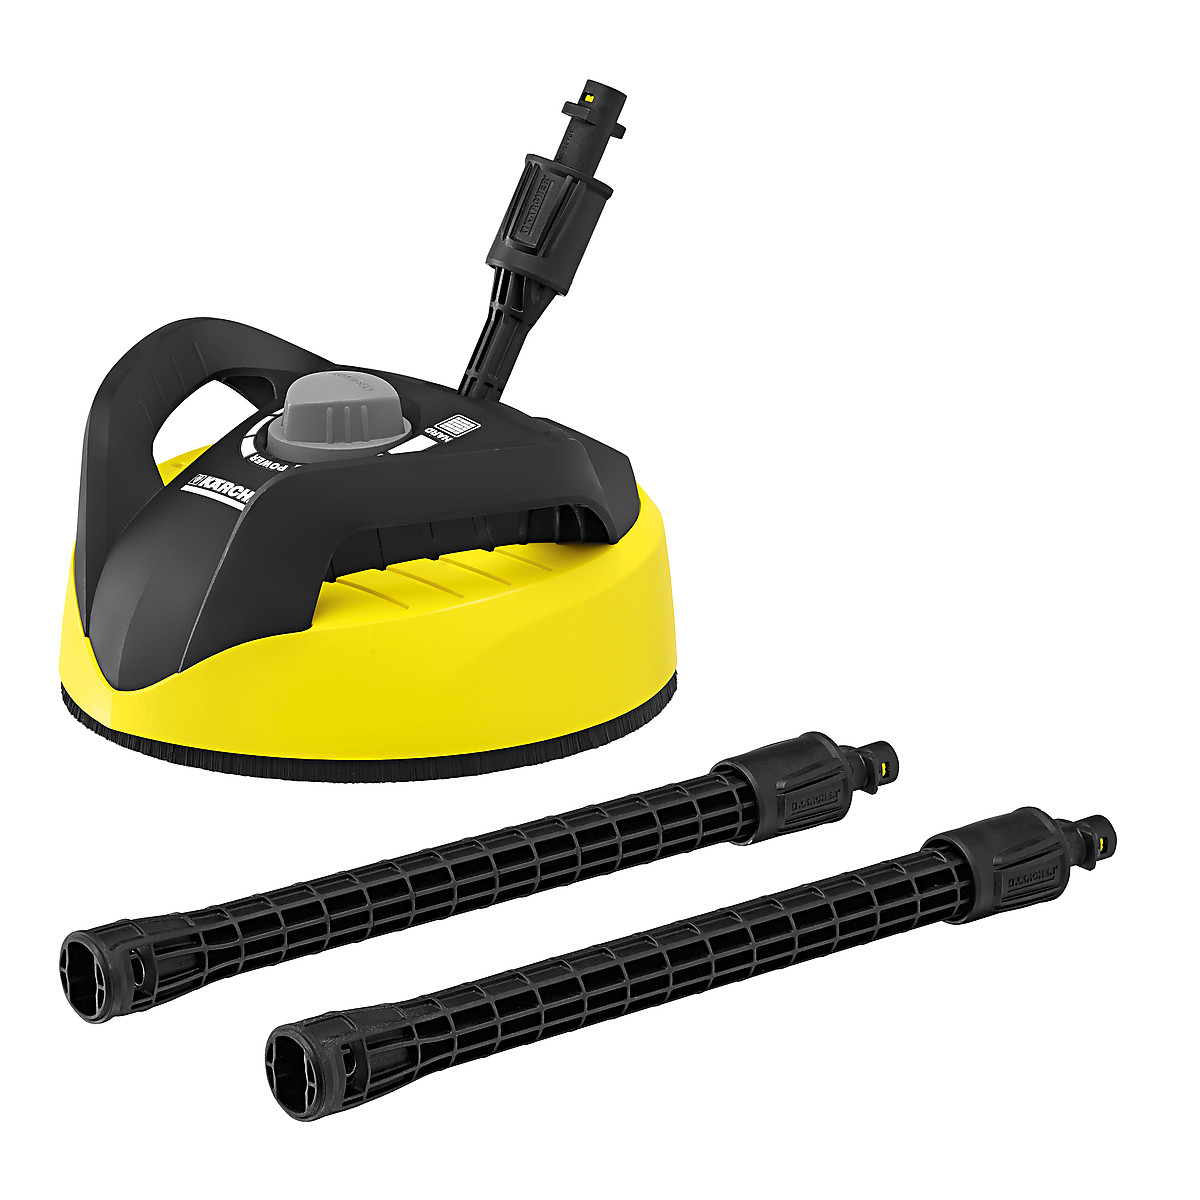 Karcher T 350 Patio Cleaner Clas Ohlson with size 1200 X 1200